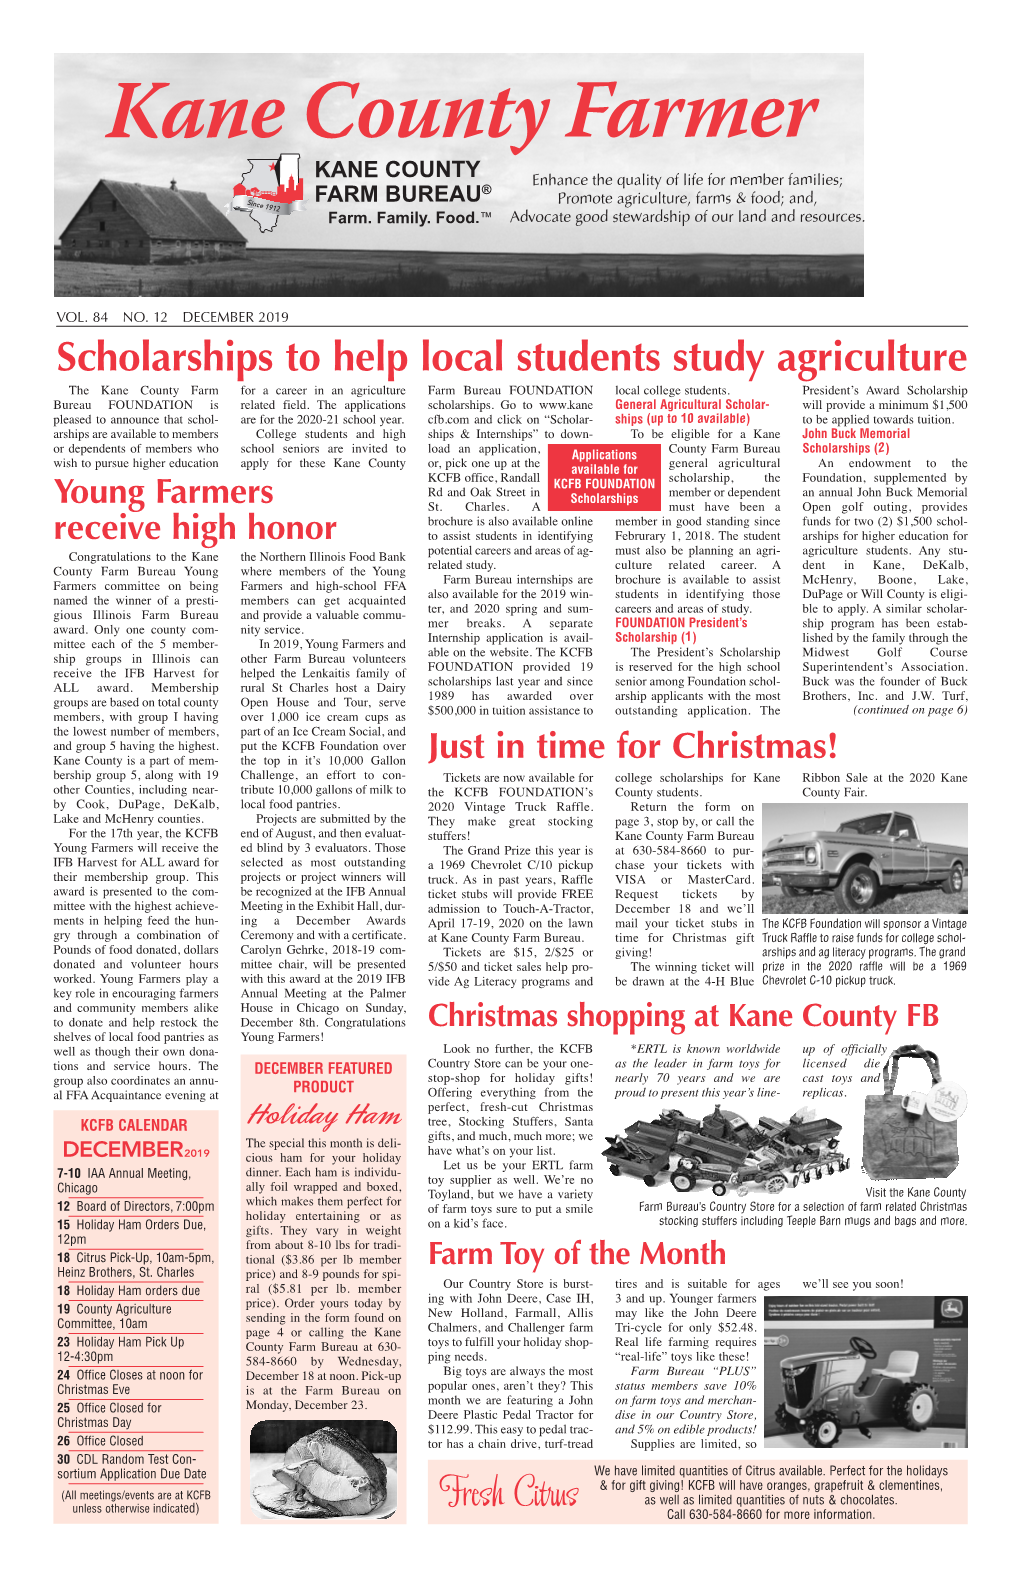 Scholarships to Help Local Students Study Agriculture